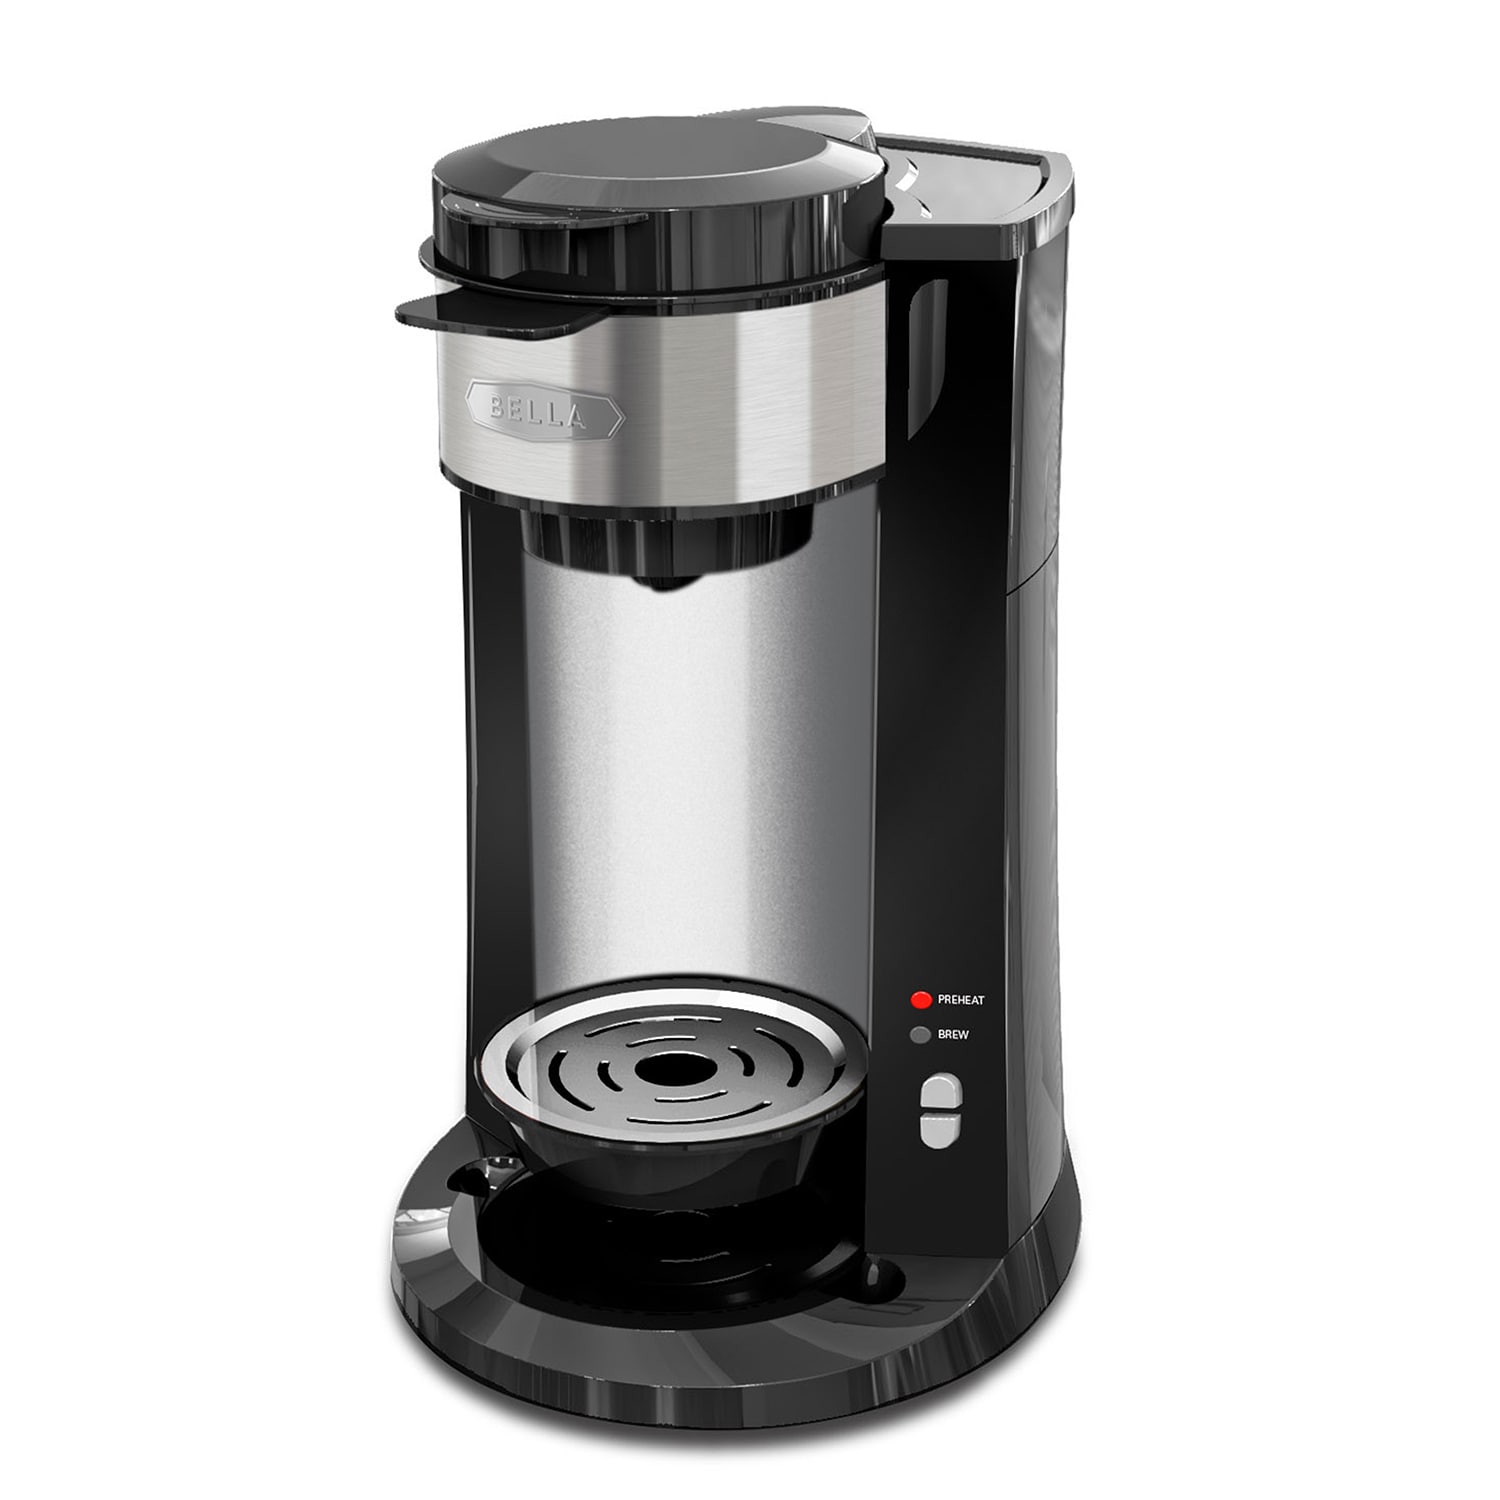 Are Bella Coffee Makers Good 